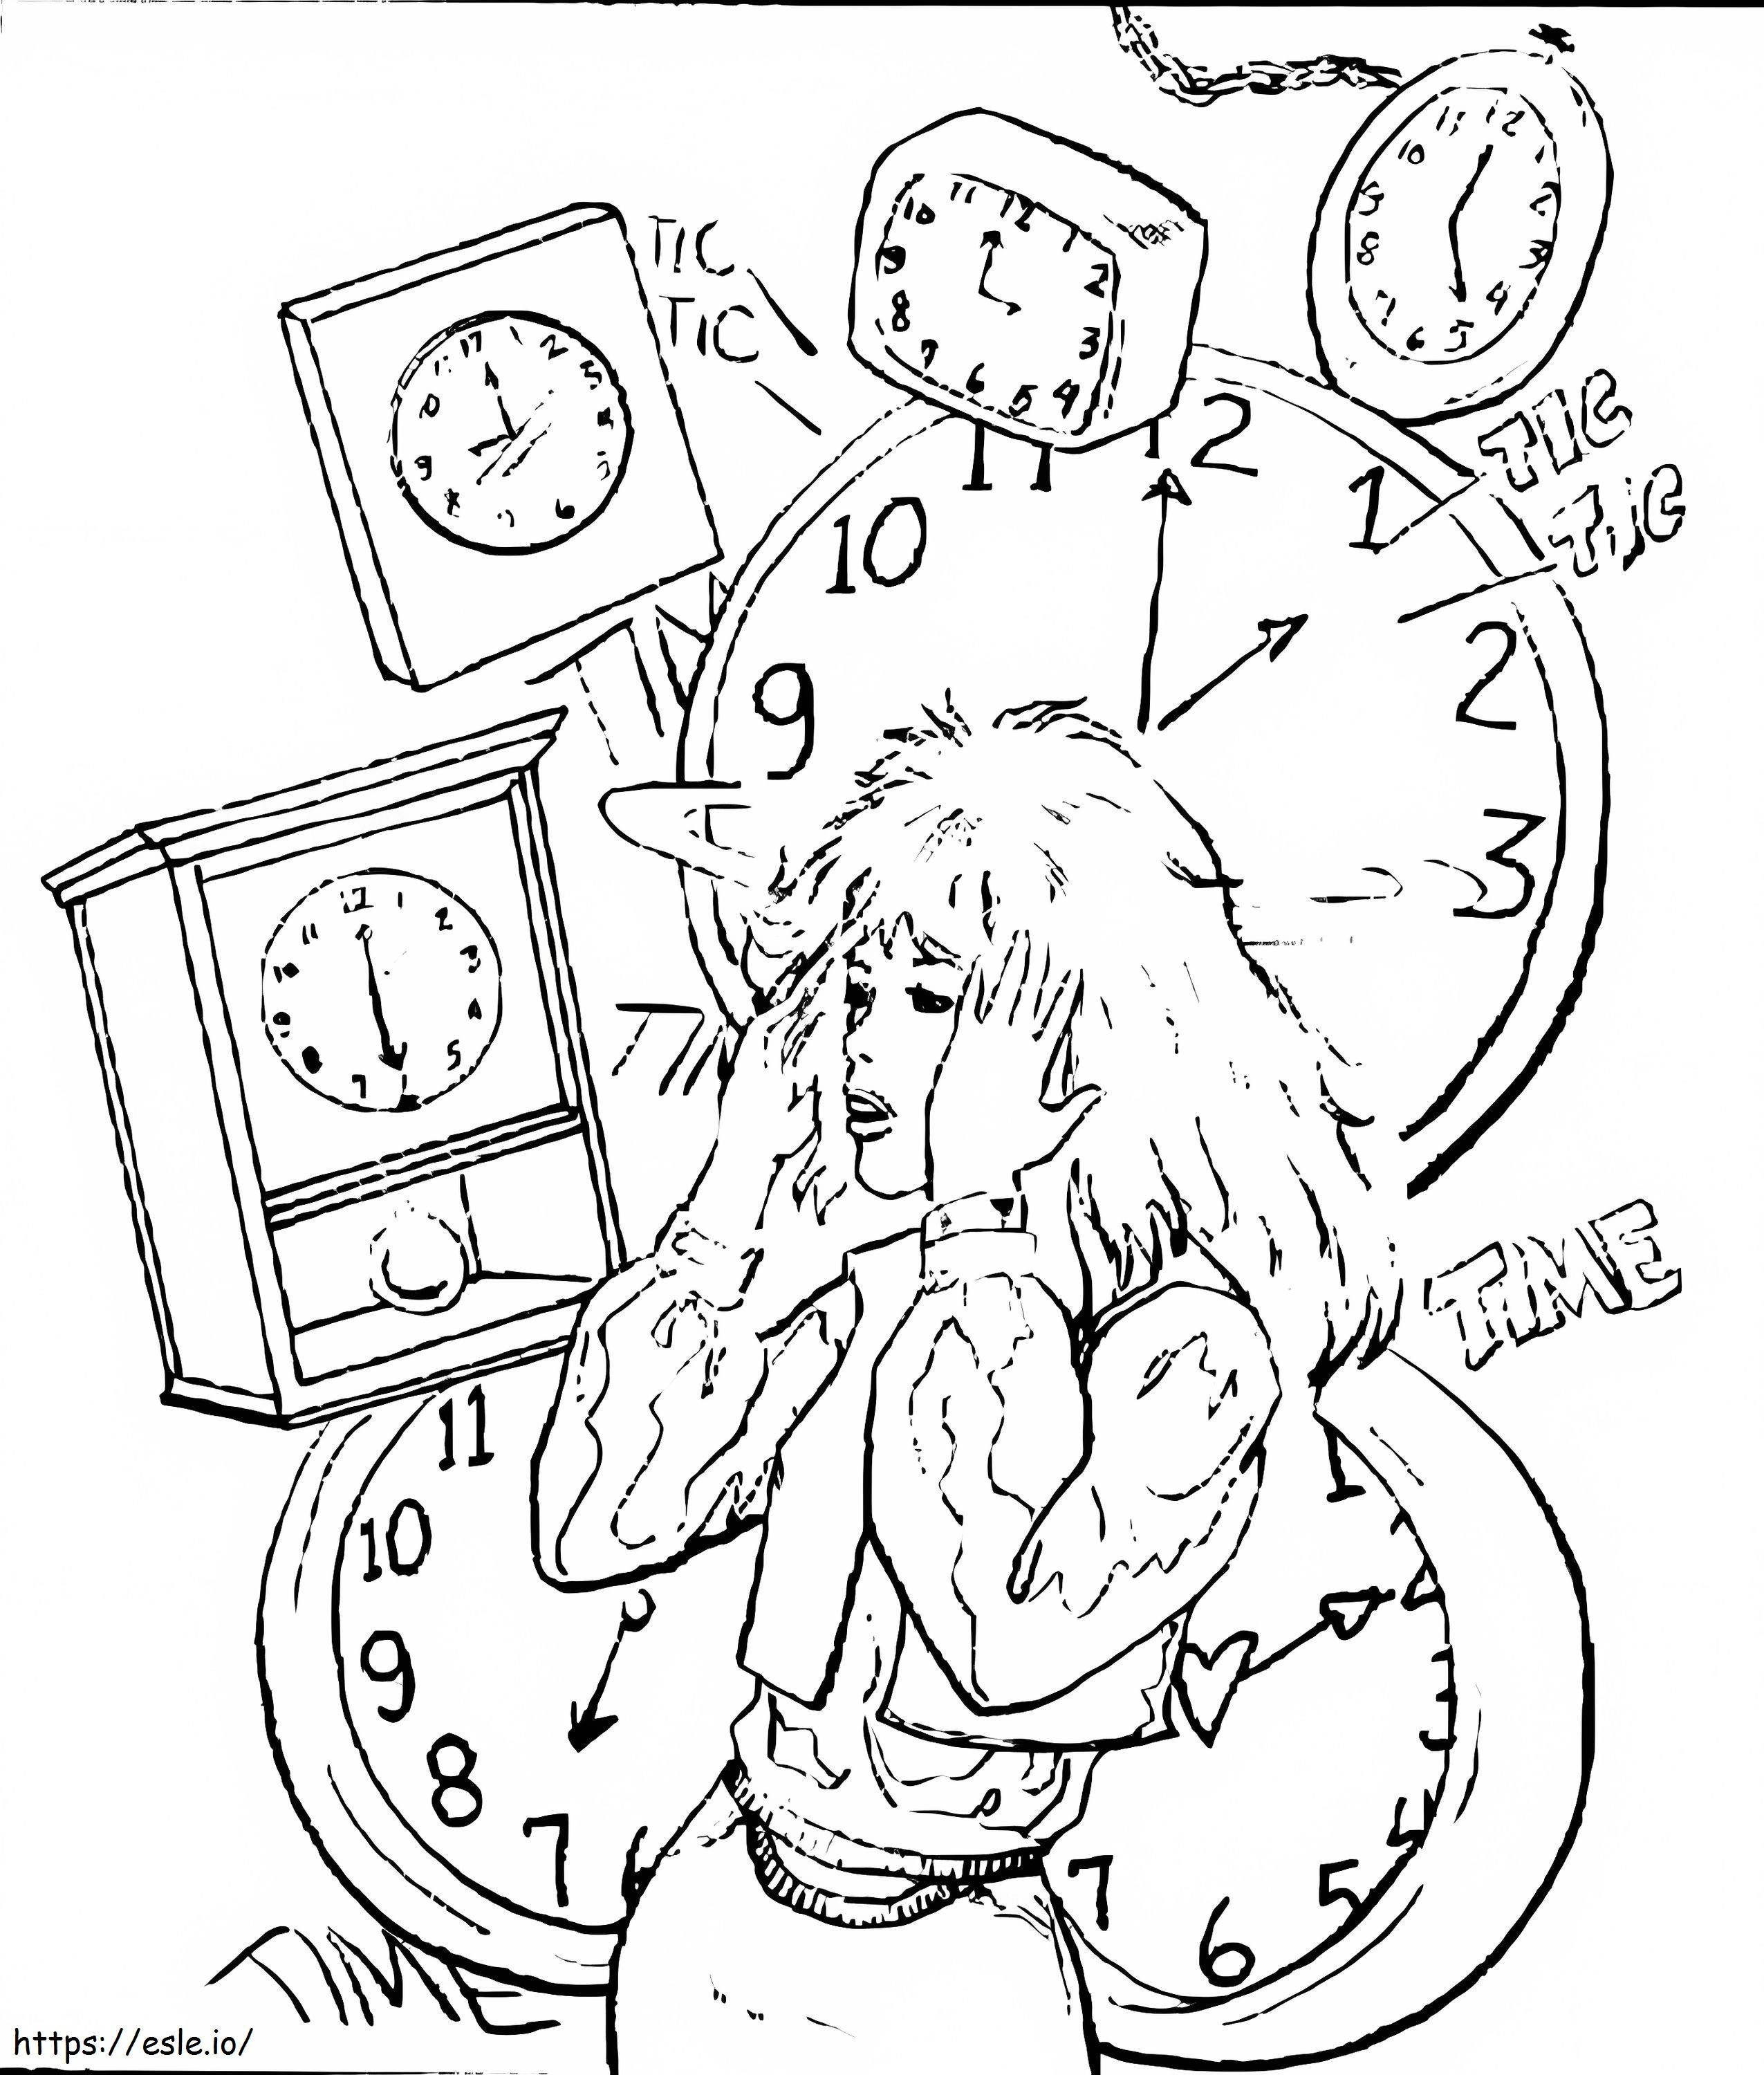 Jem And The Holograms 19 coloring page